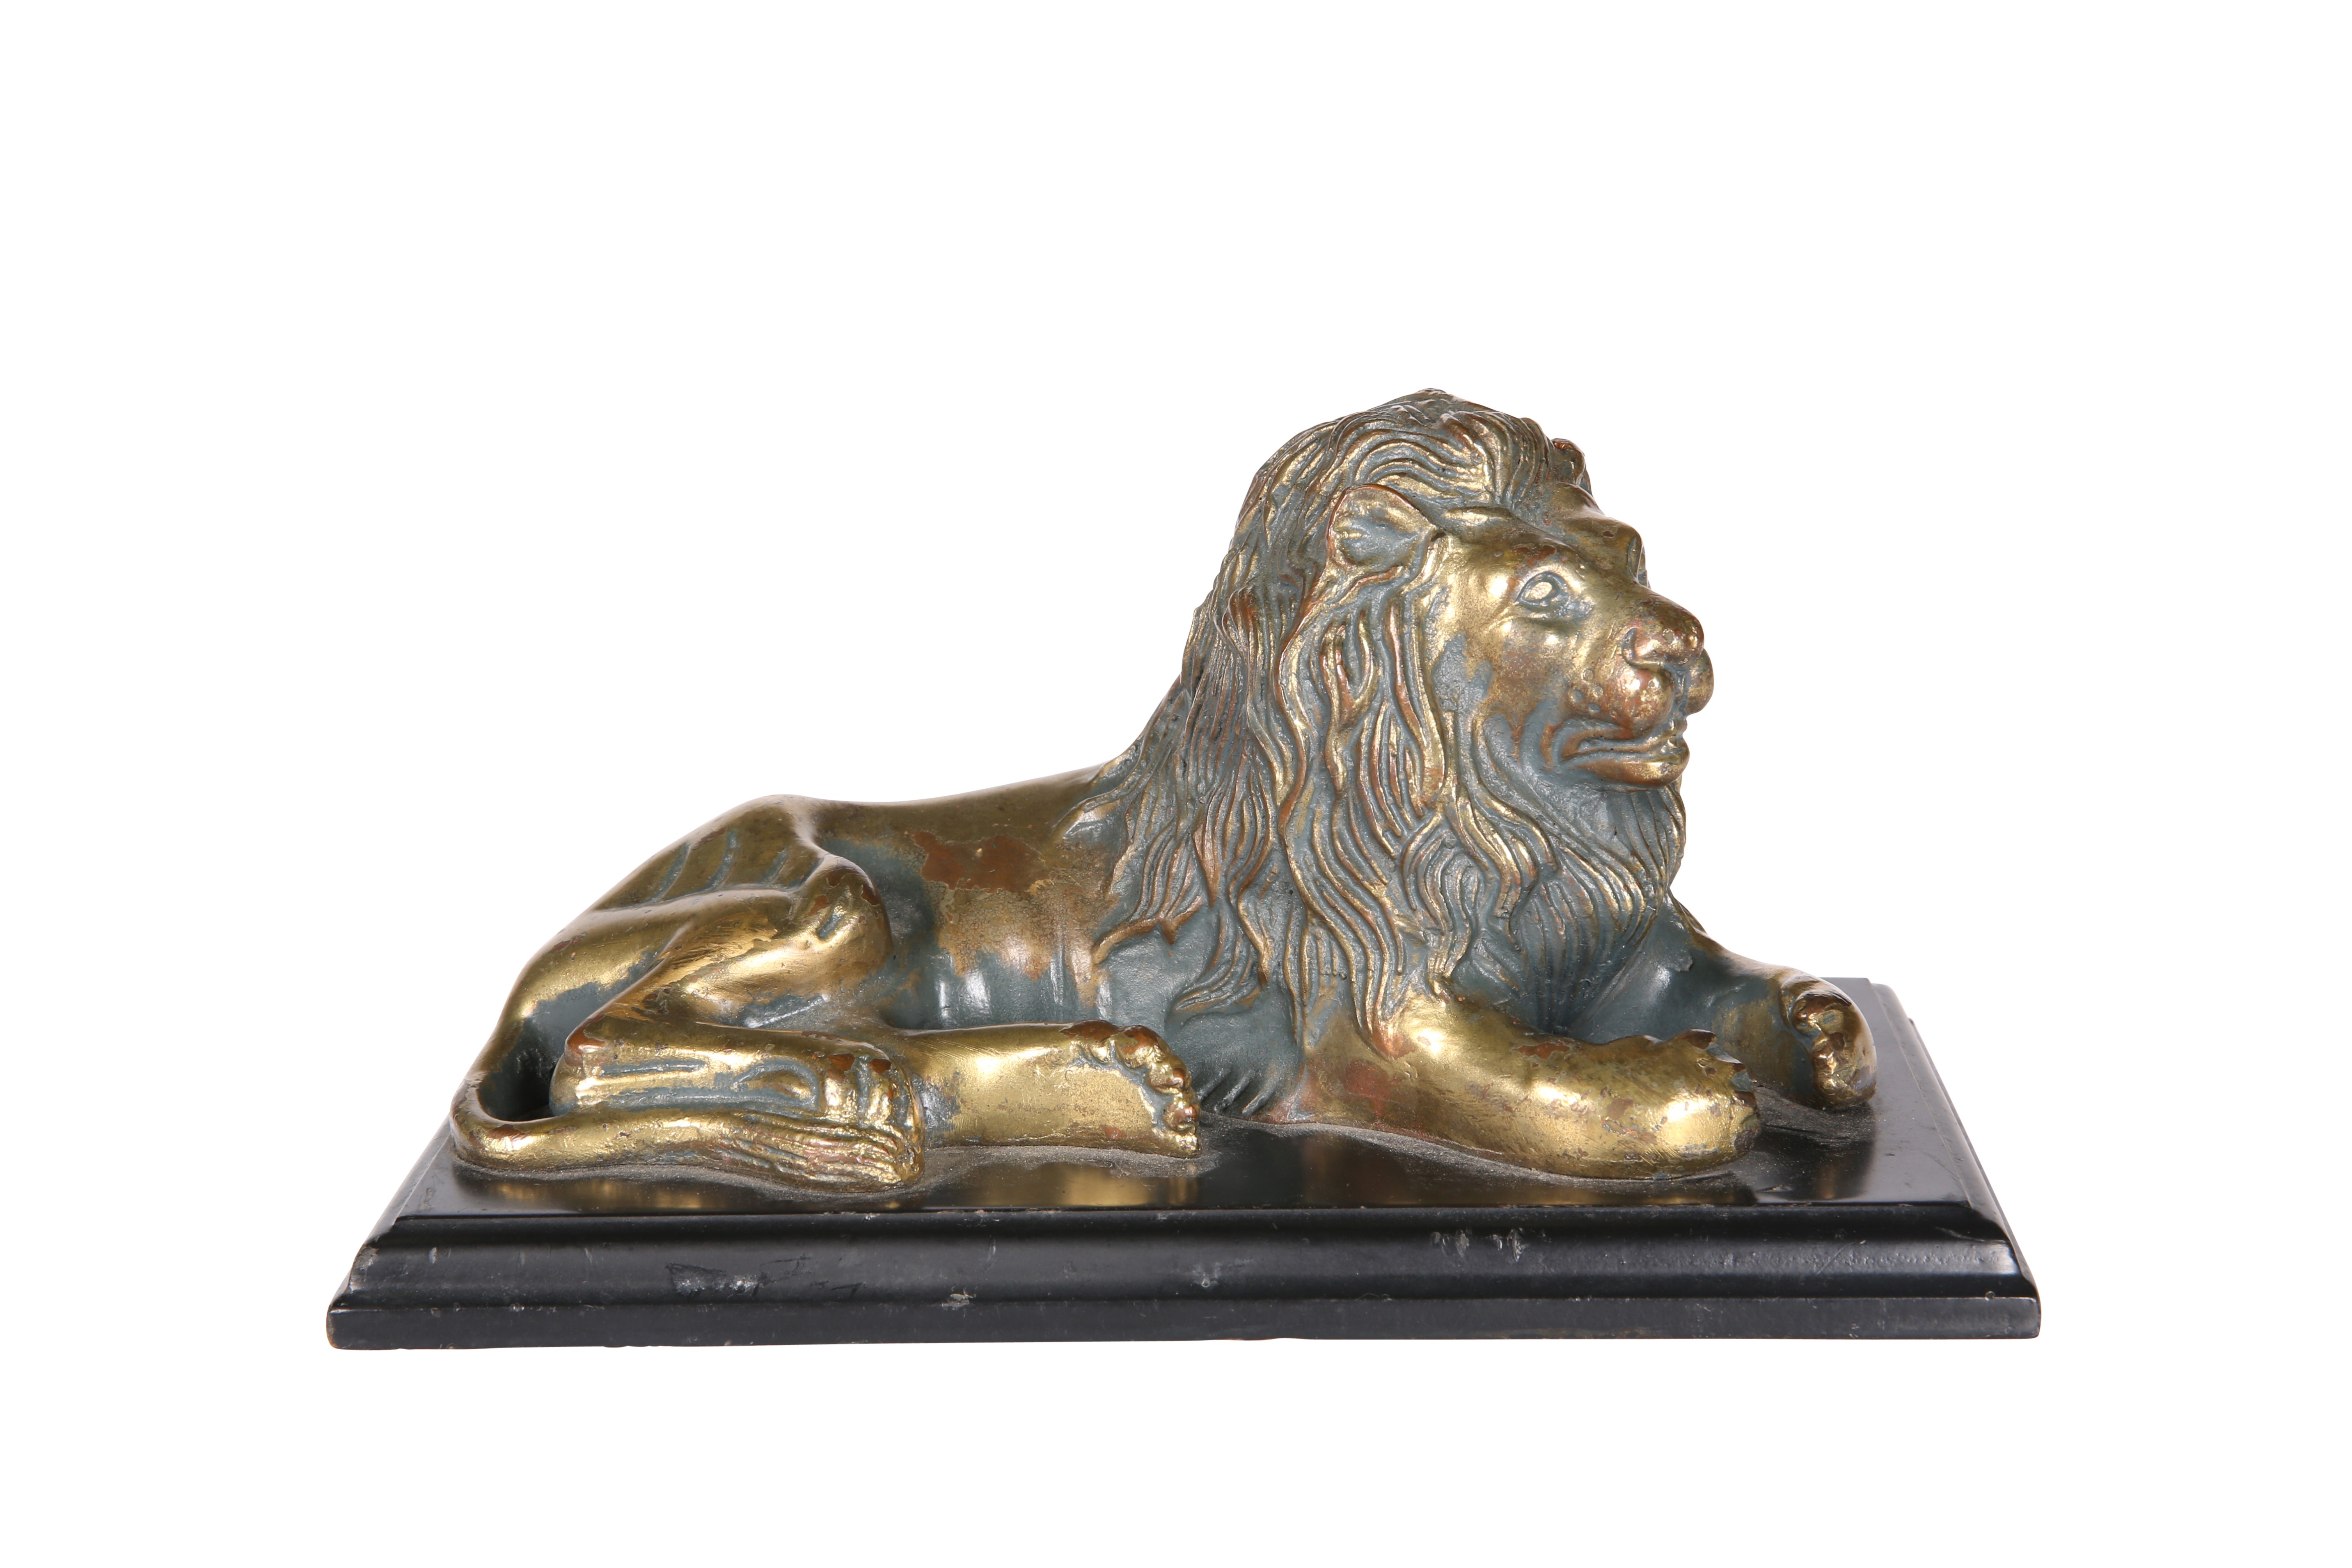 A GILDED BRONZE MODEL OF A RECUMBENT LION